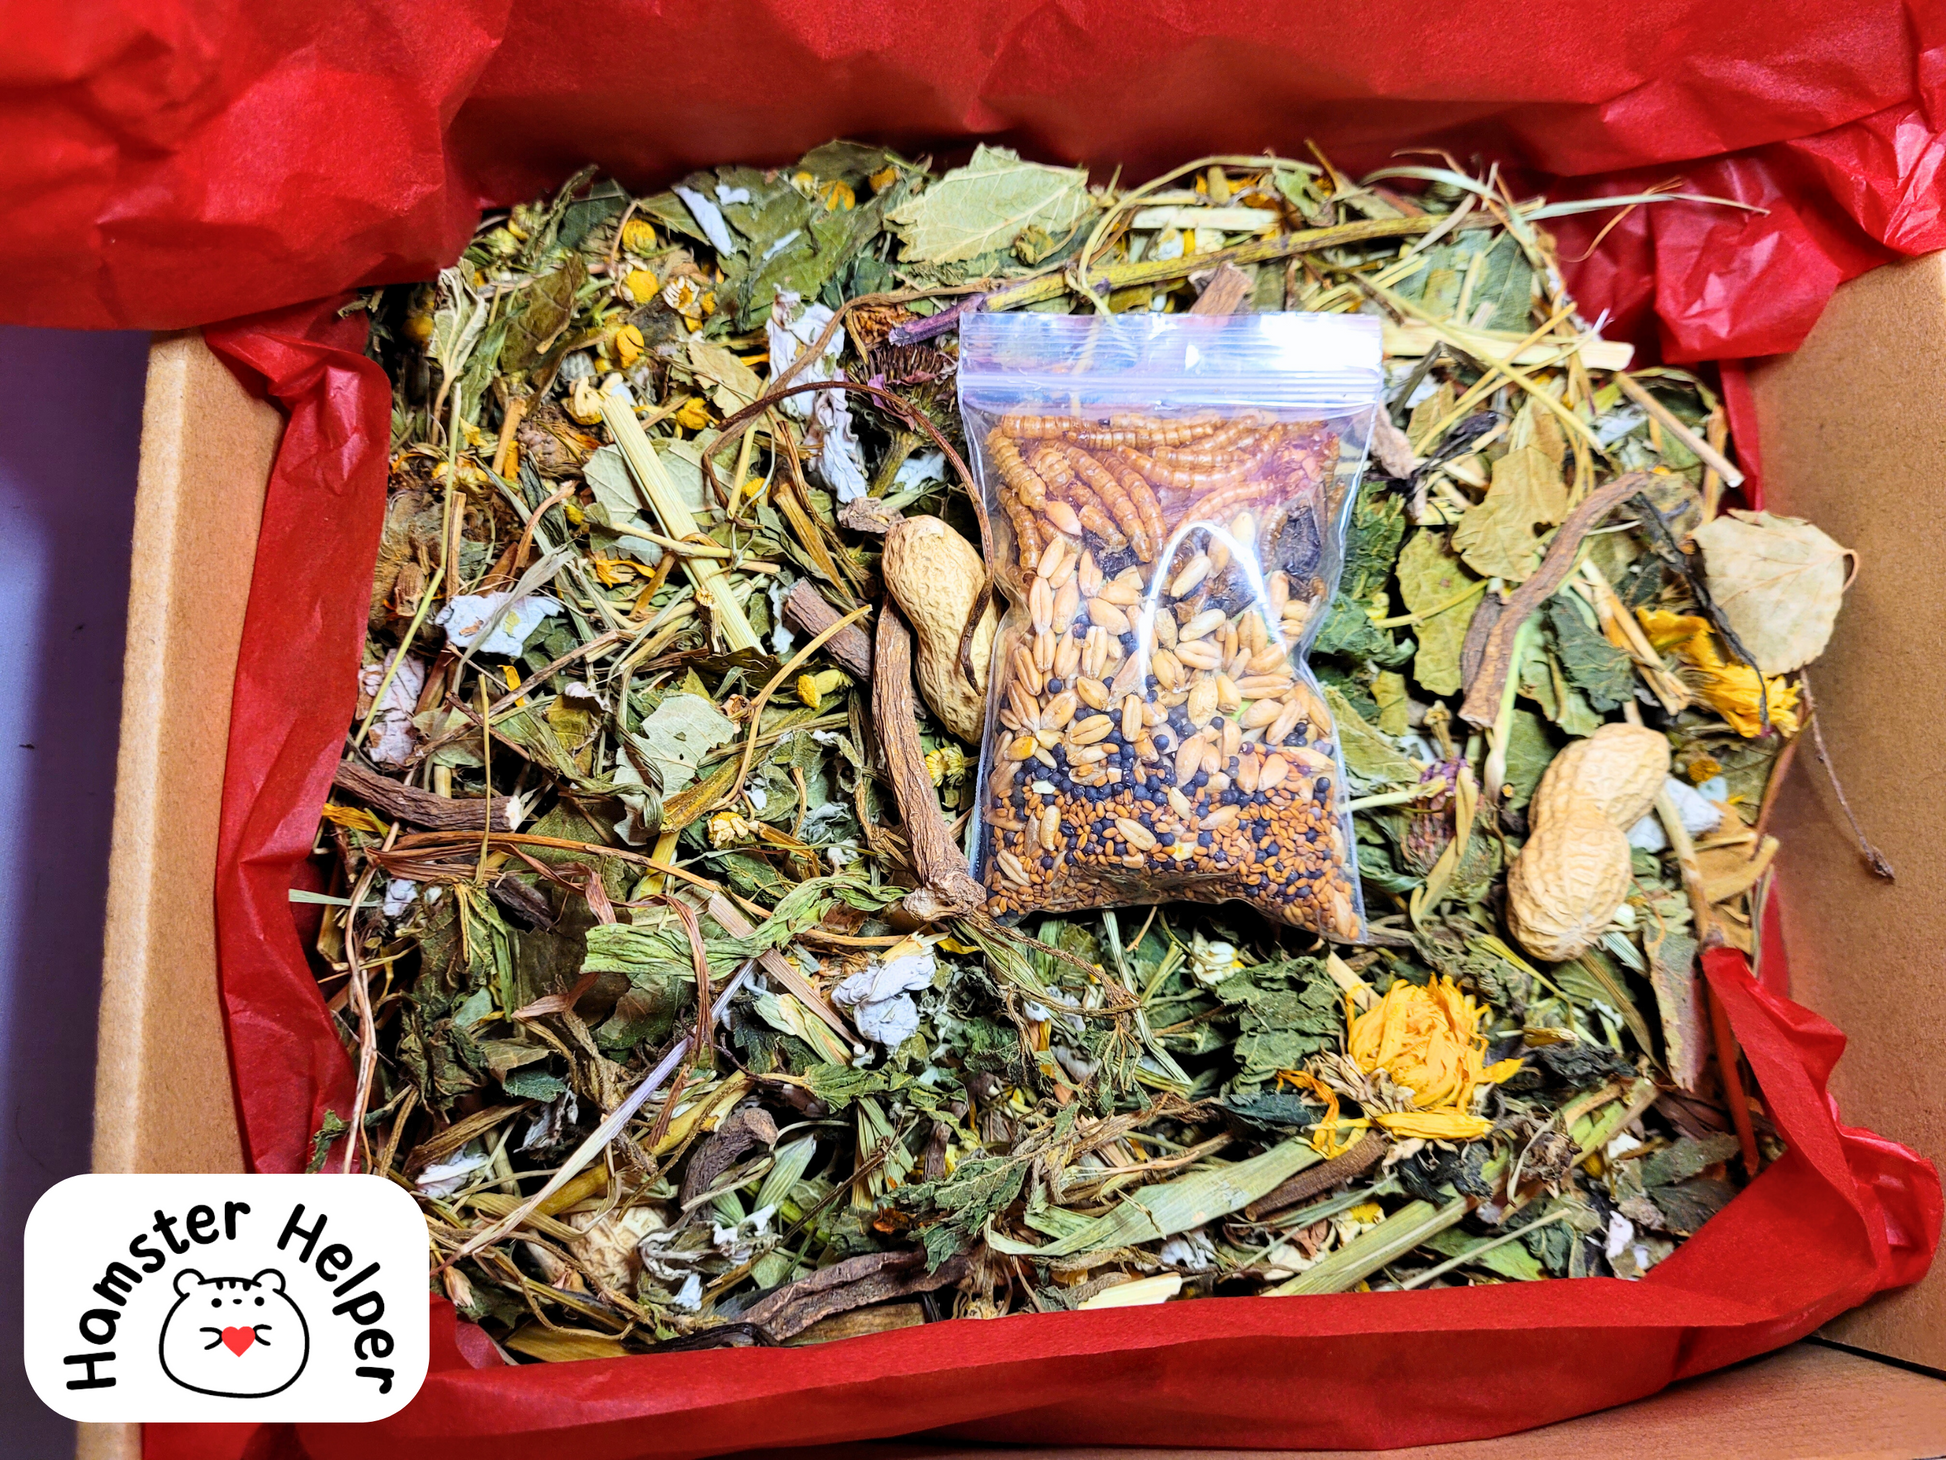 A close up of the hamster safe forage mix showing the crunchy topper resting on top of the forage mix inside a cardboard box that is lined with red tissue paper